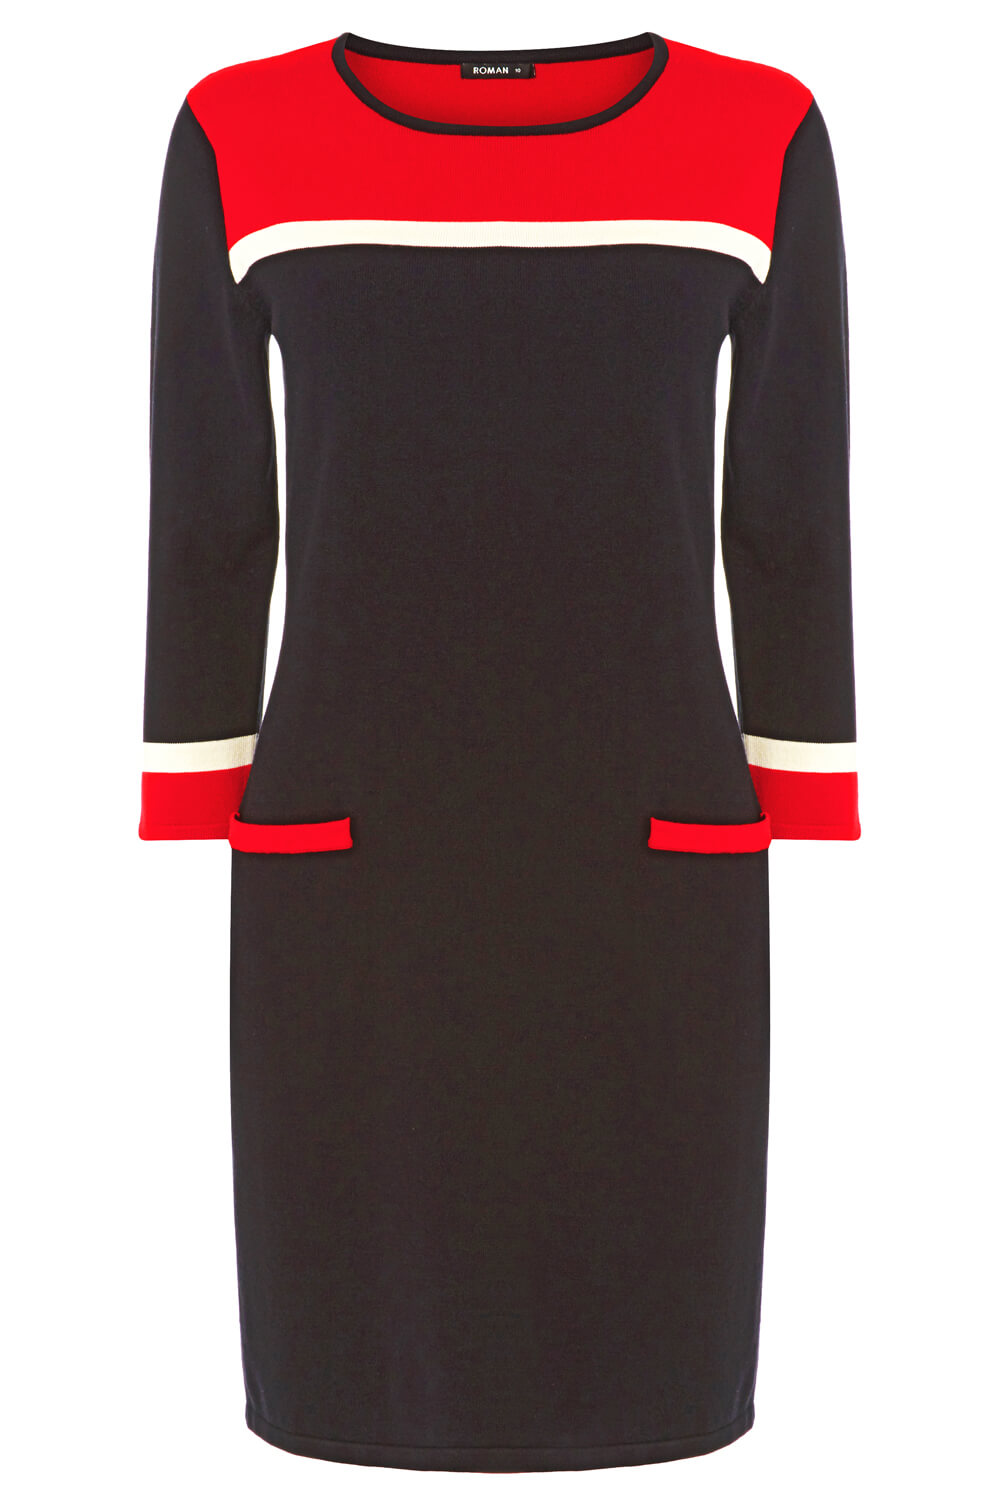 Red Colour Block Knitted Dress, Image 6 of 6